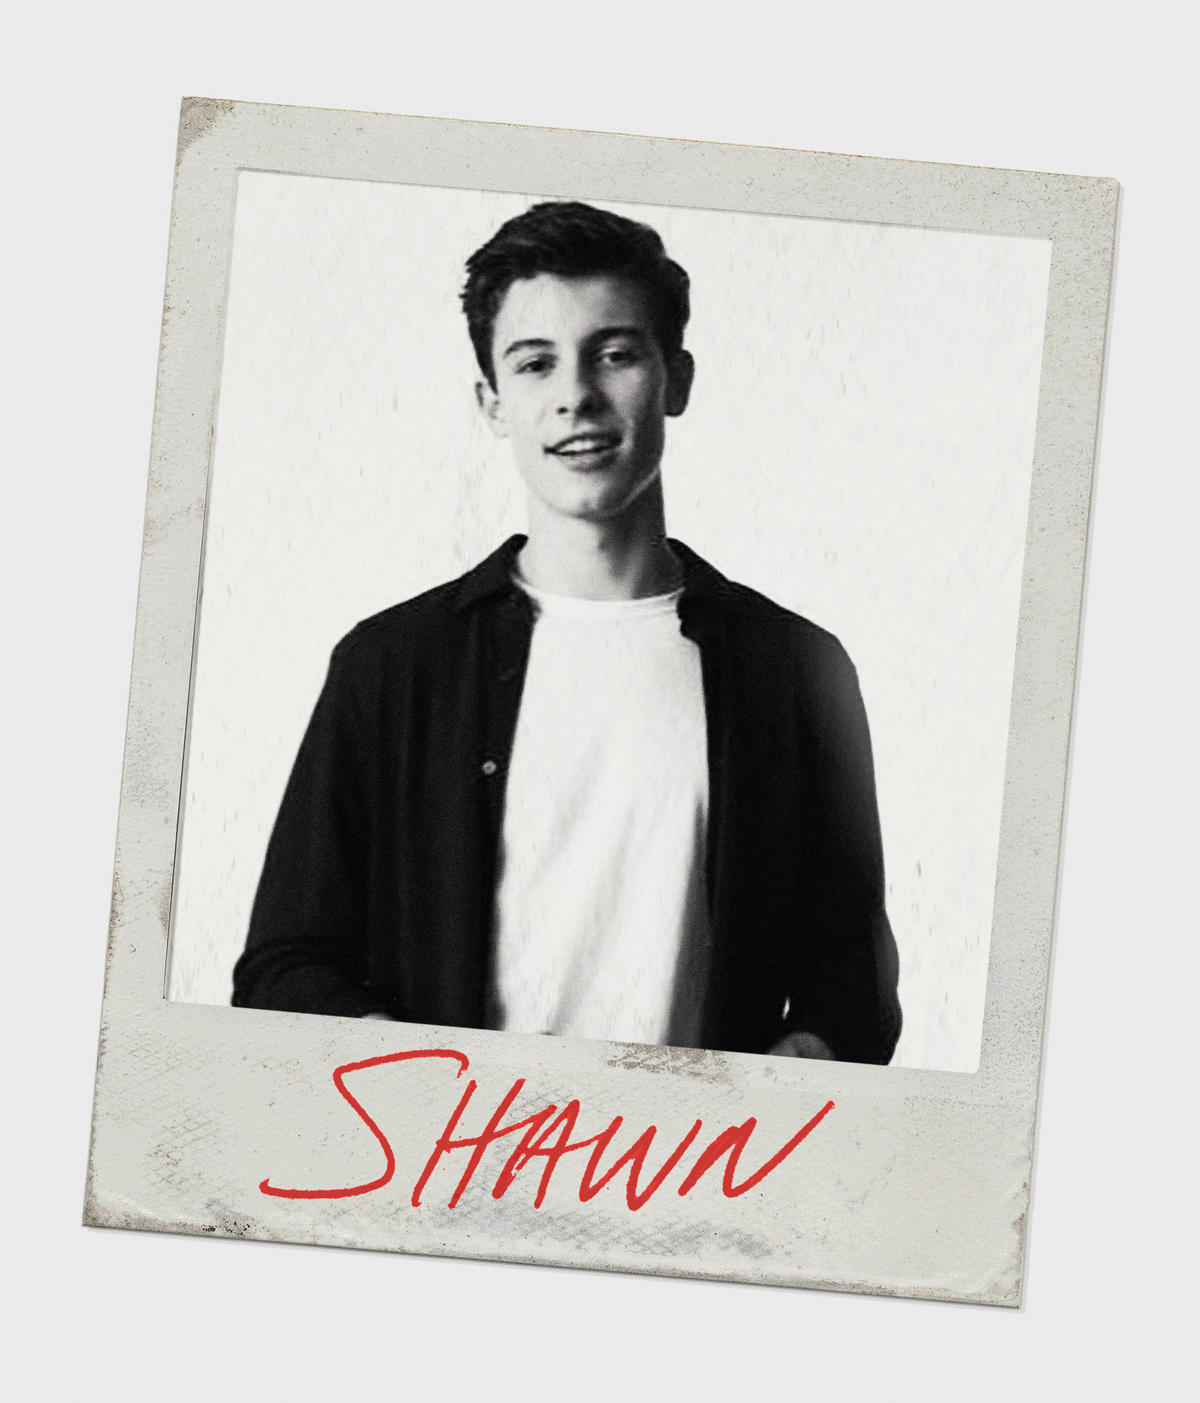 Shawn Mendes Adds Modeling to His Long List of Talents